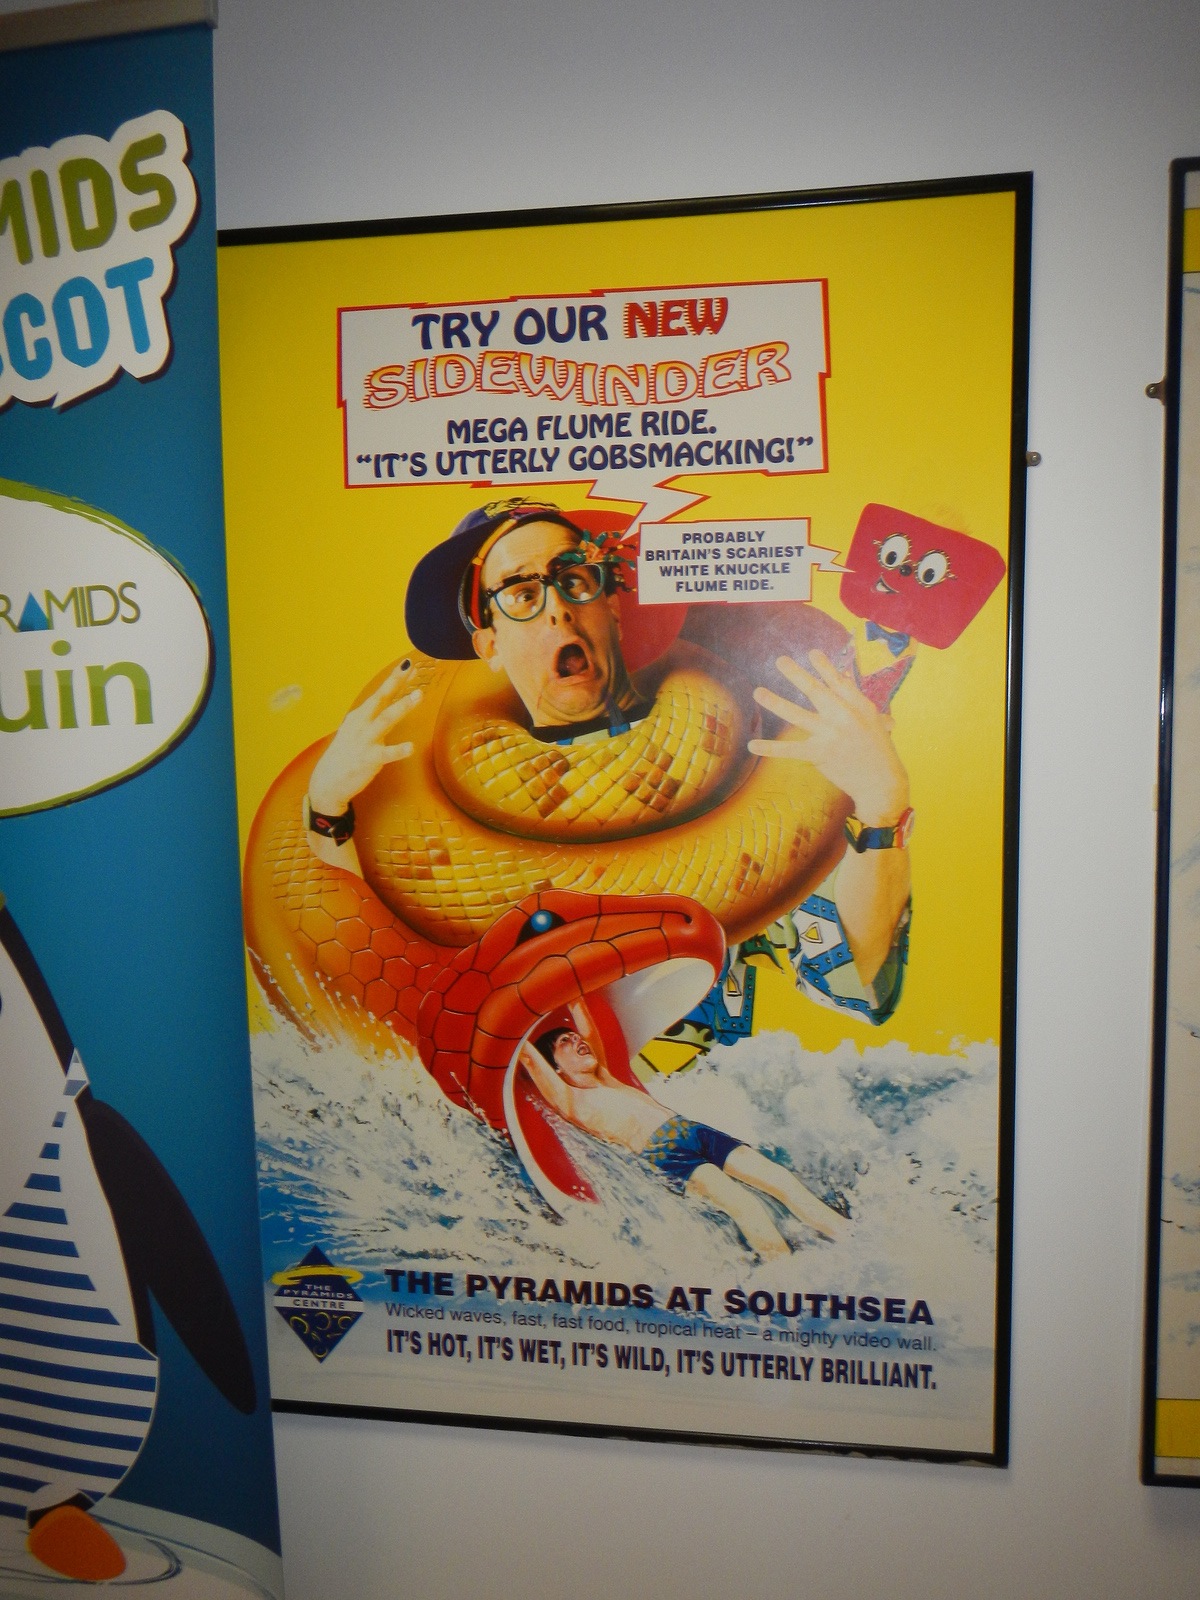  ​poster promoting the slides in the Pyramid Centre pool. 